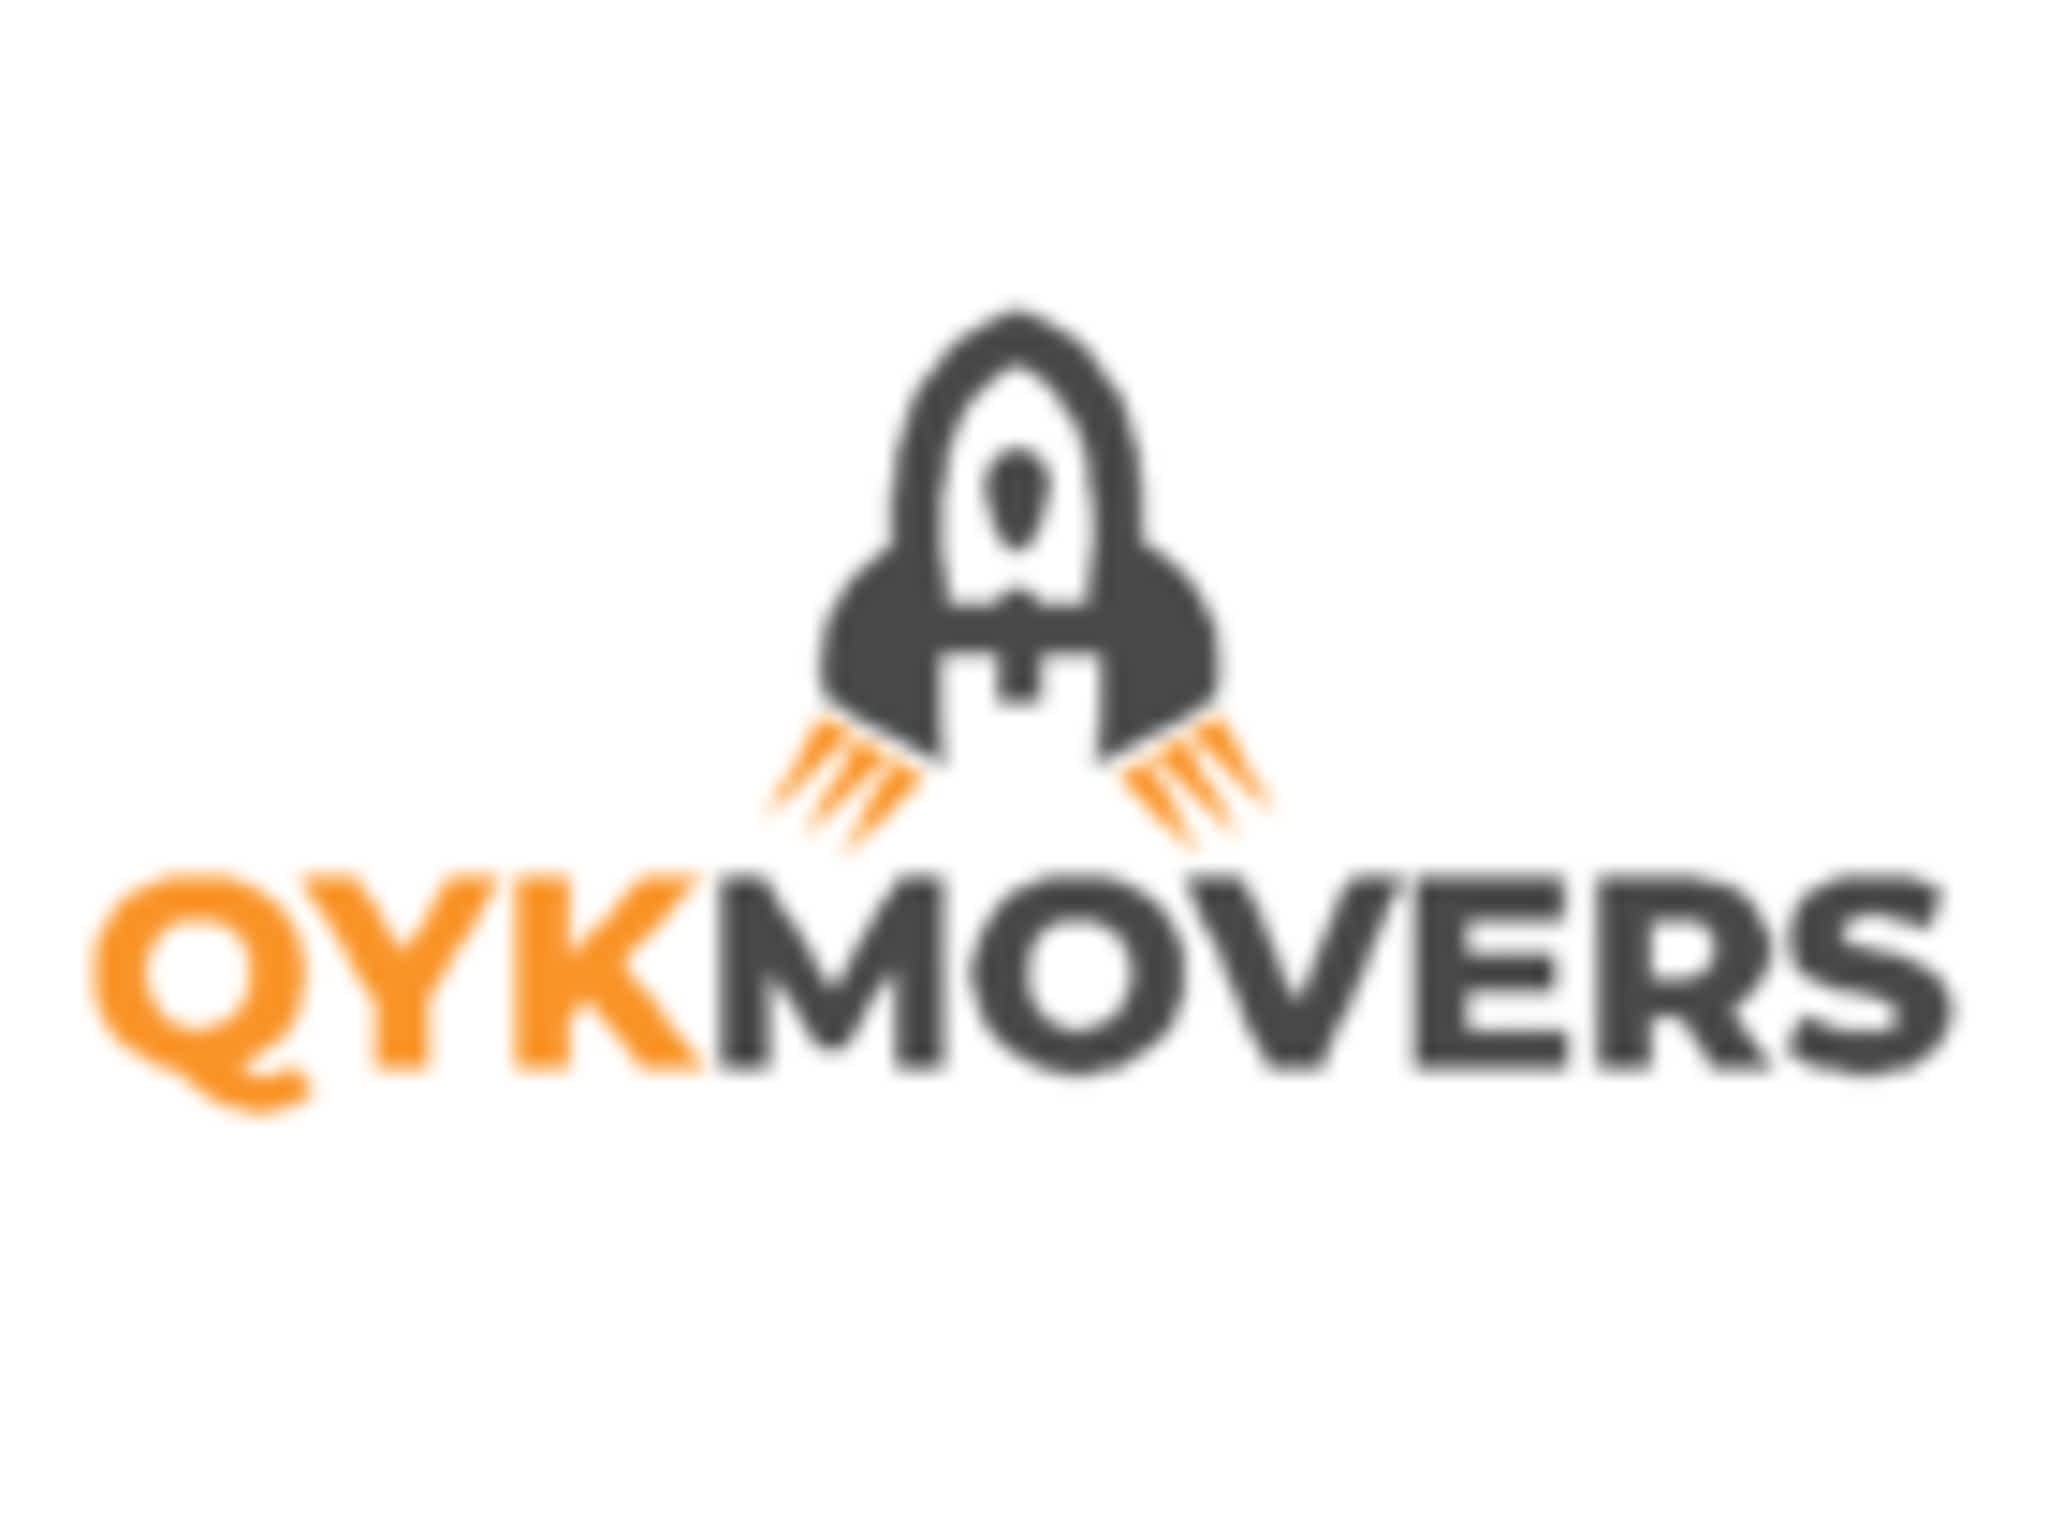 photo QYK Movers